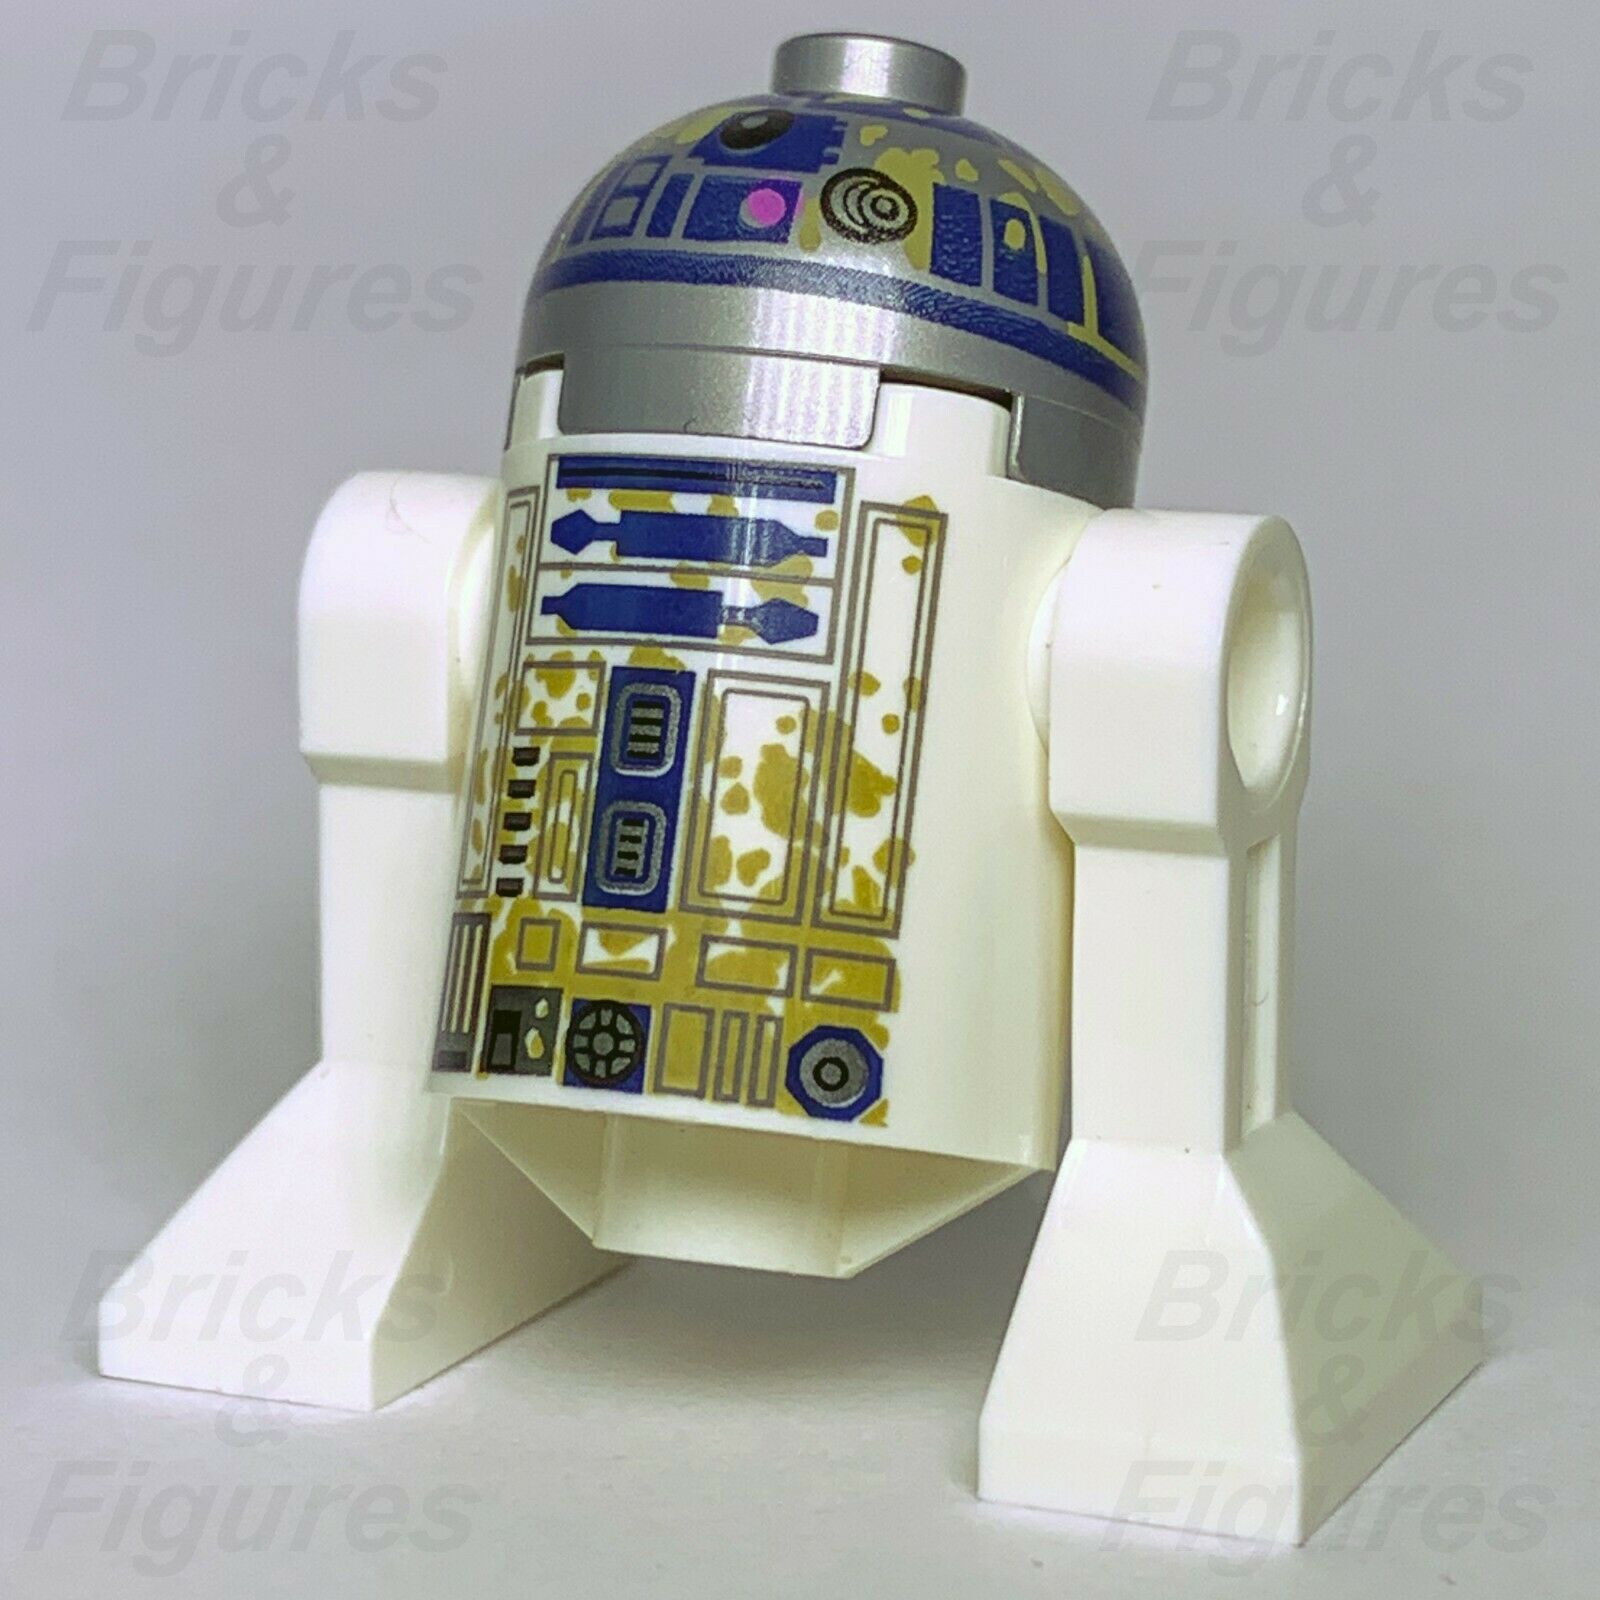 New Star Wars LEGO R2-D2 Astromech Droid with Dirt Stains Minifigure 75208 - Bricks & Figures